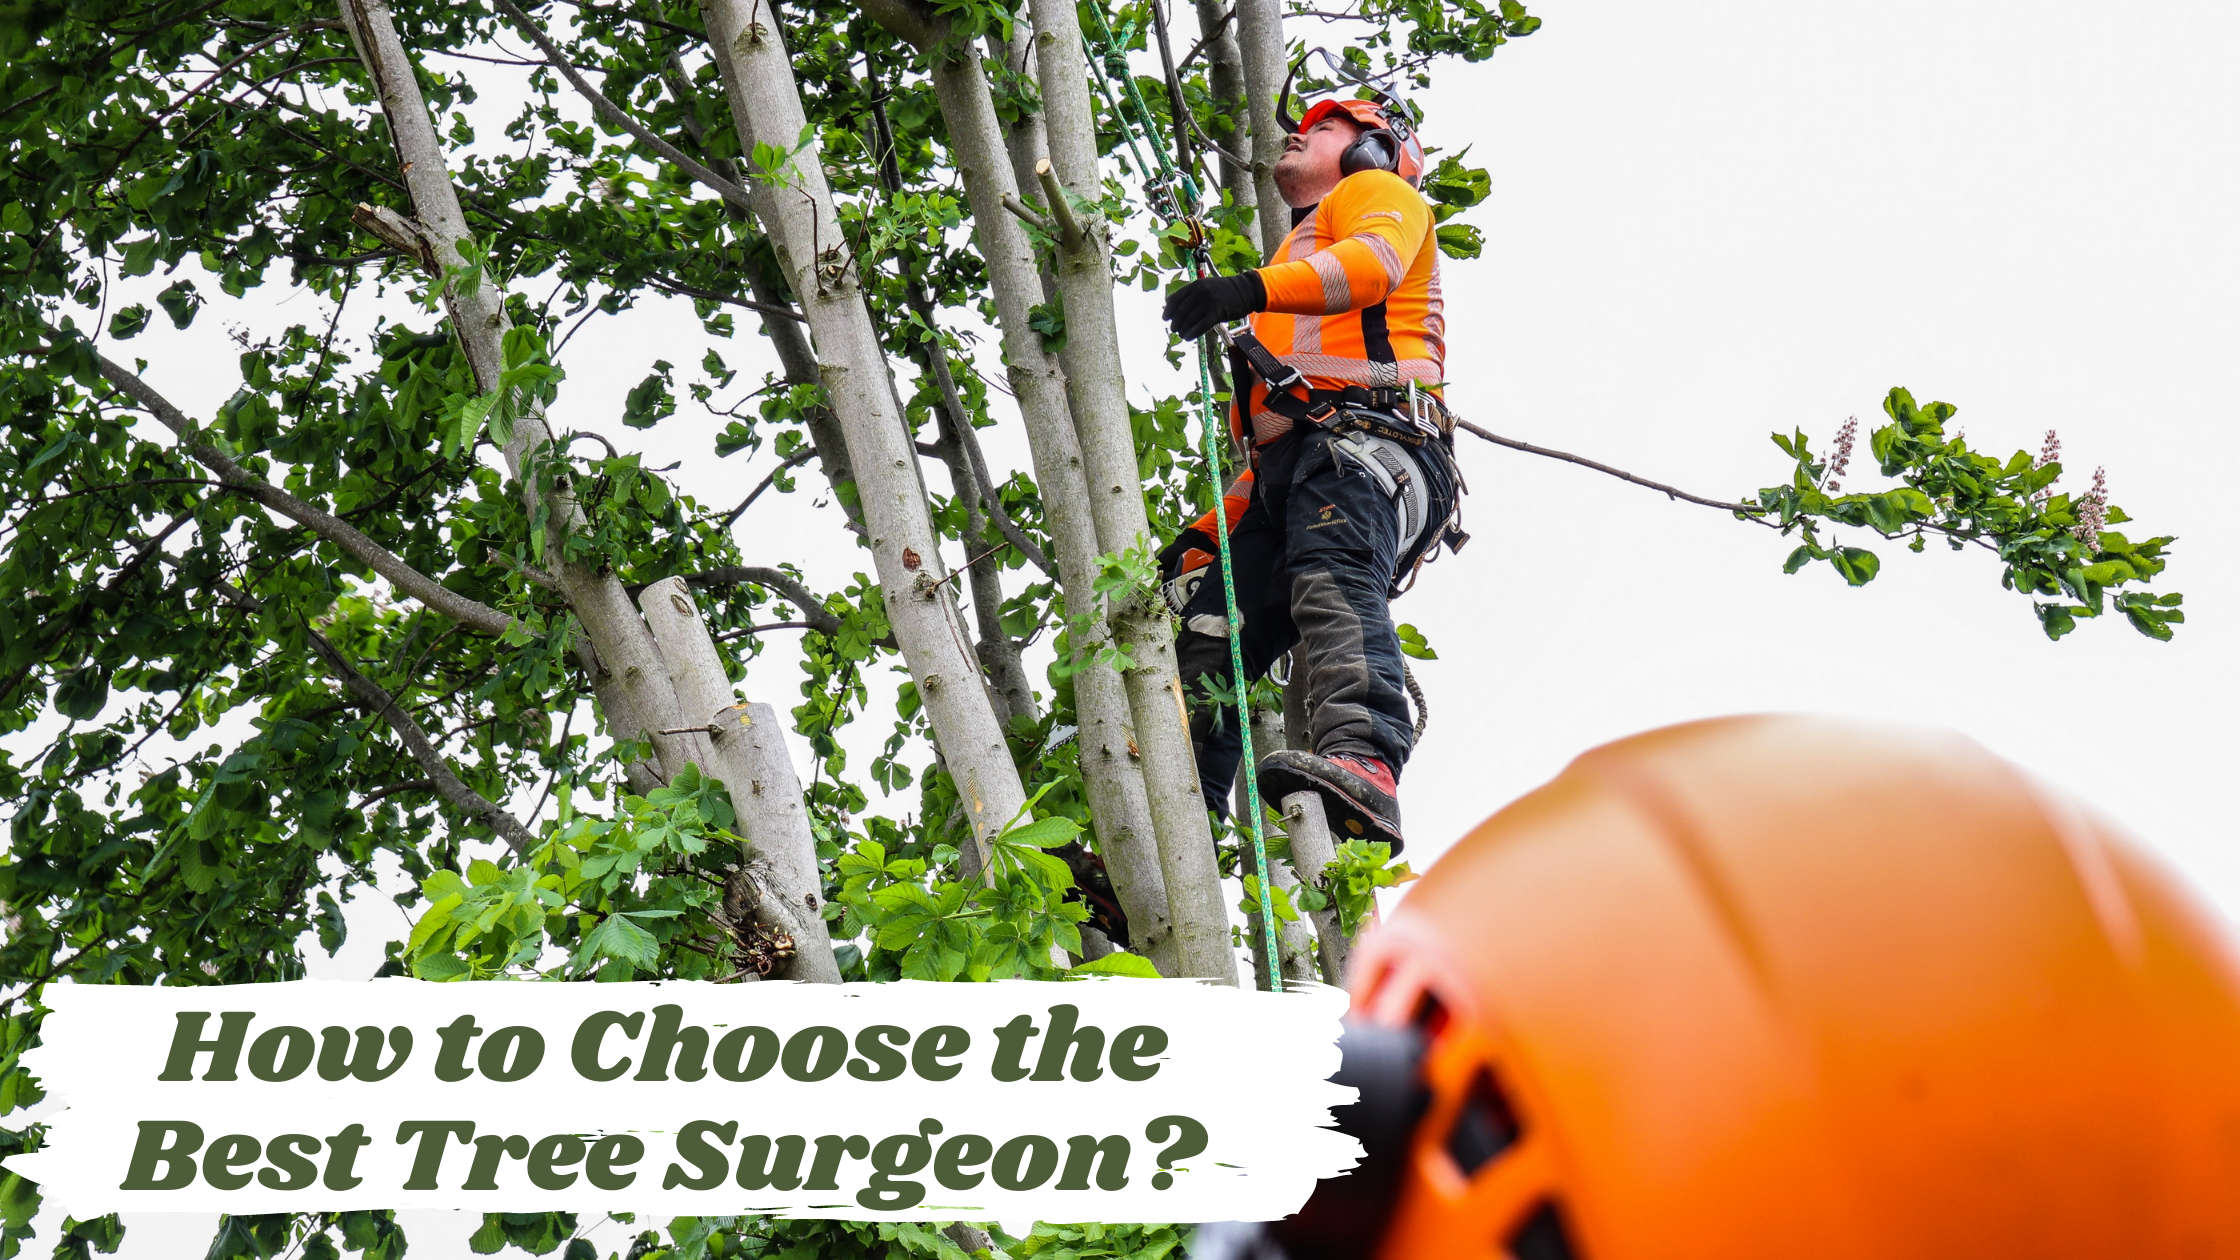 How to Choose the Best Tree Surgeon?